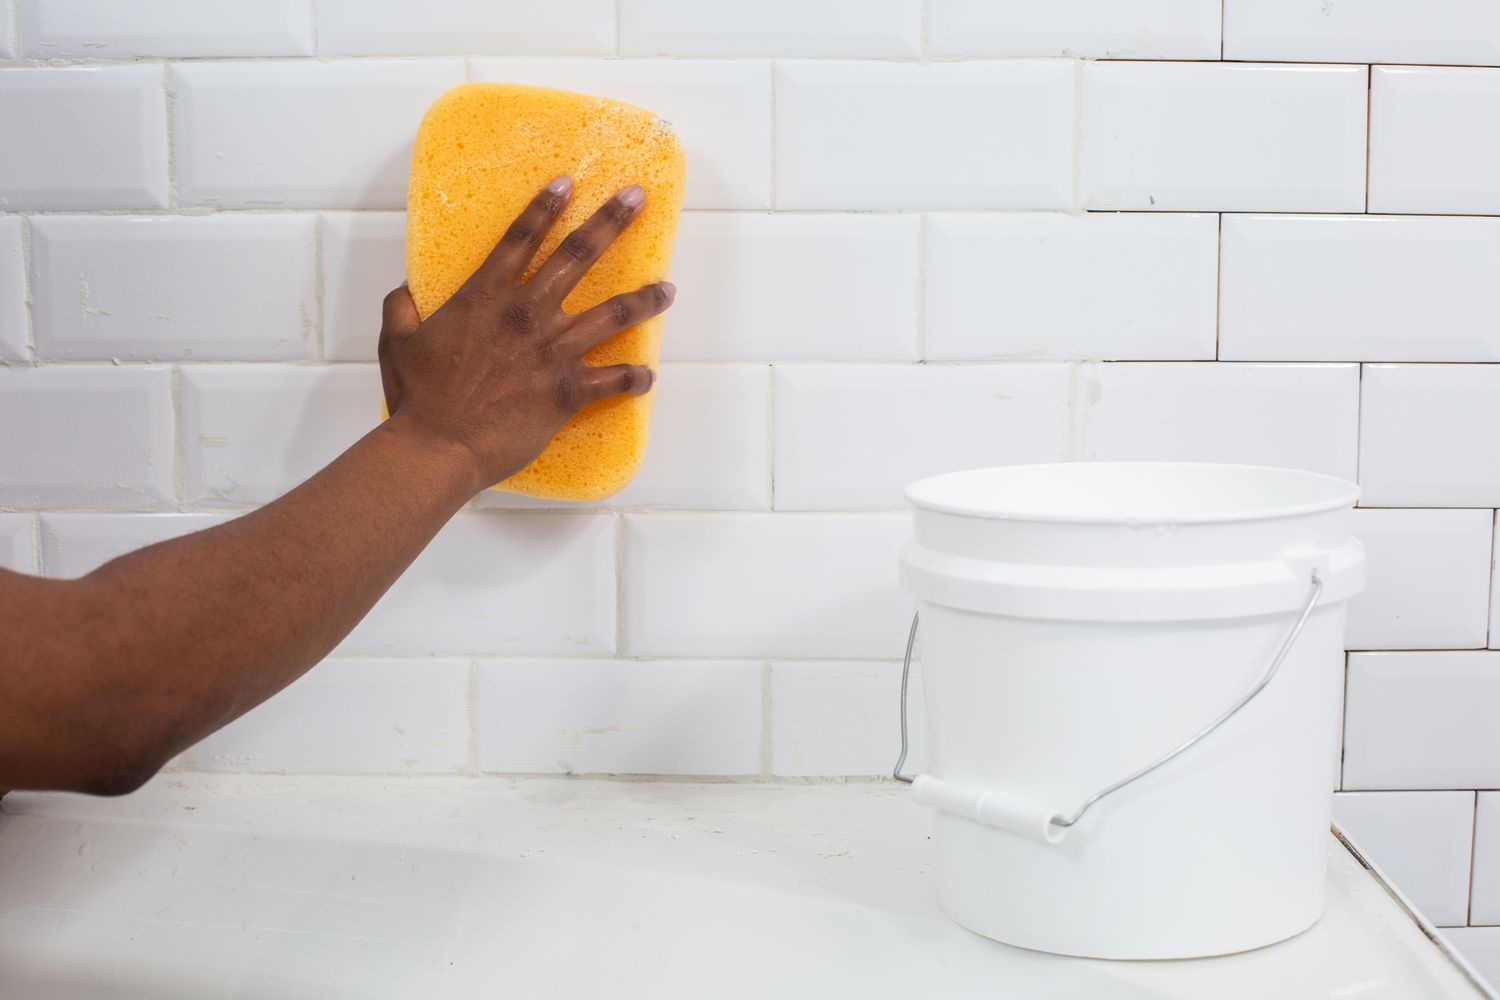 Yellow sponge wiping across white ceramic tile next to white bucket with hot water